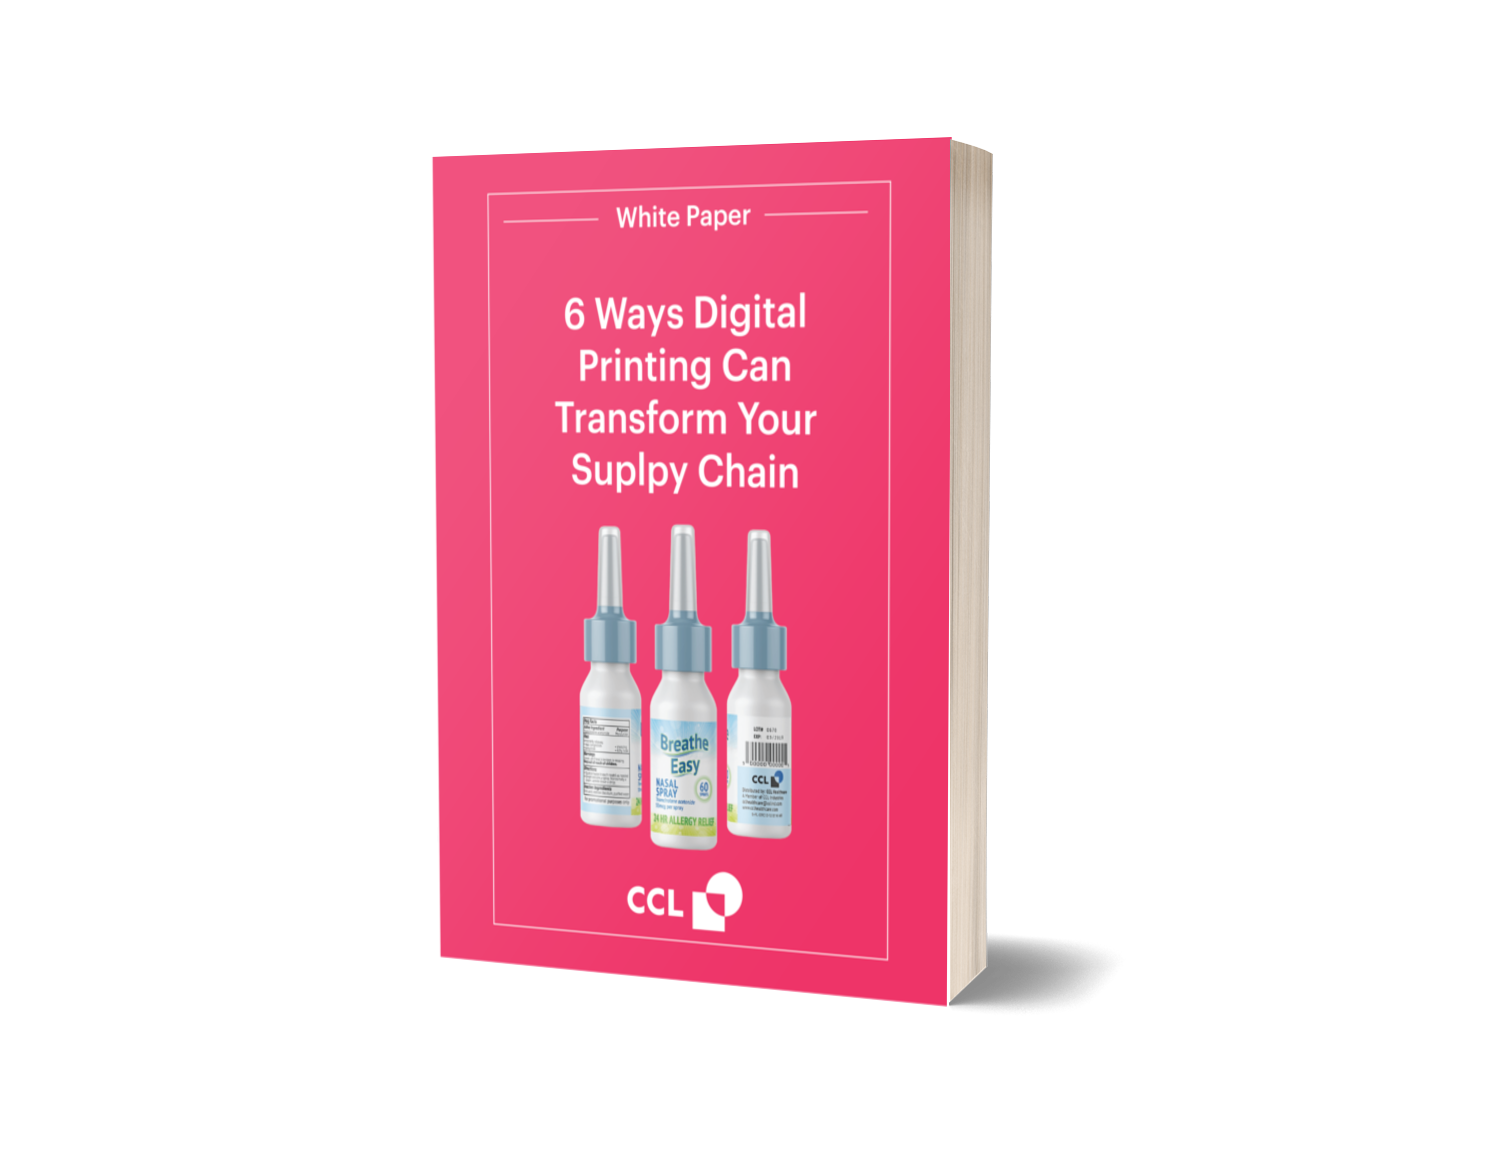 White Paper: 6 Ways Digital Printing Can Transform Your Supply Chain